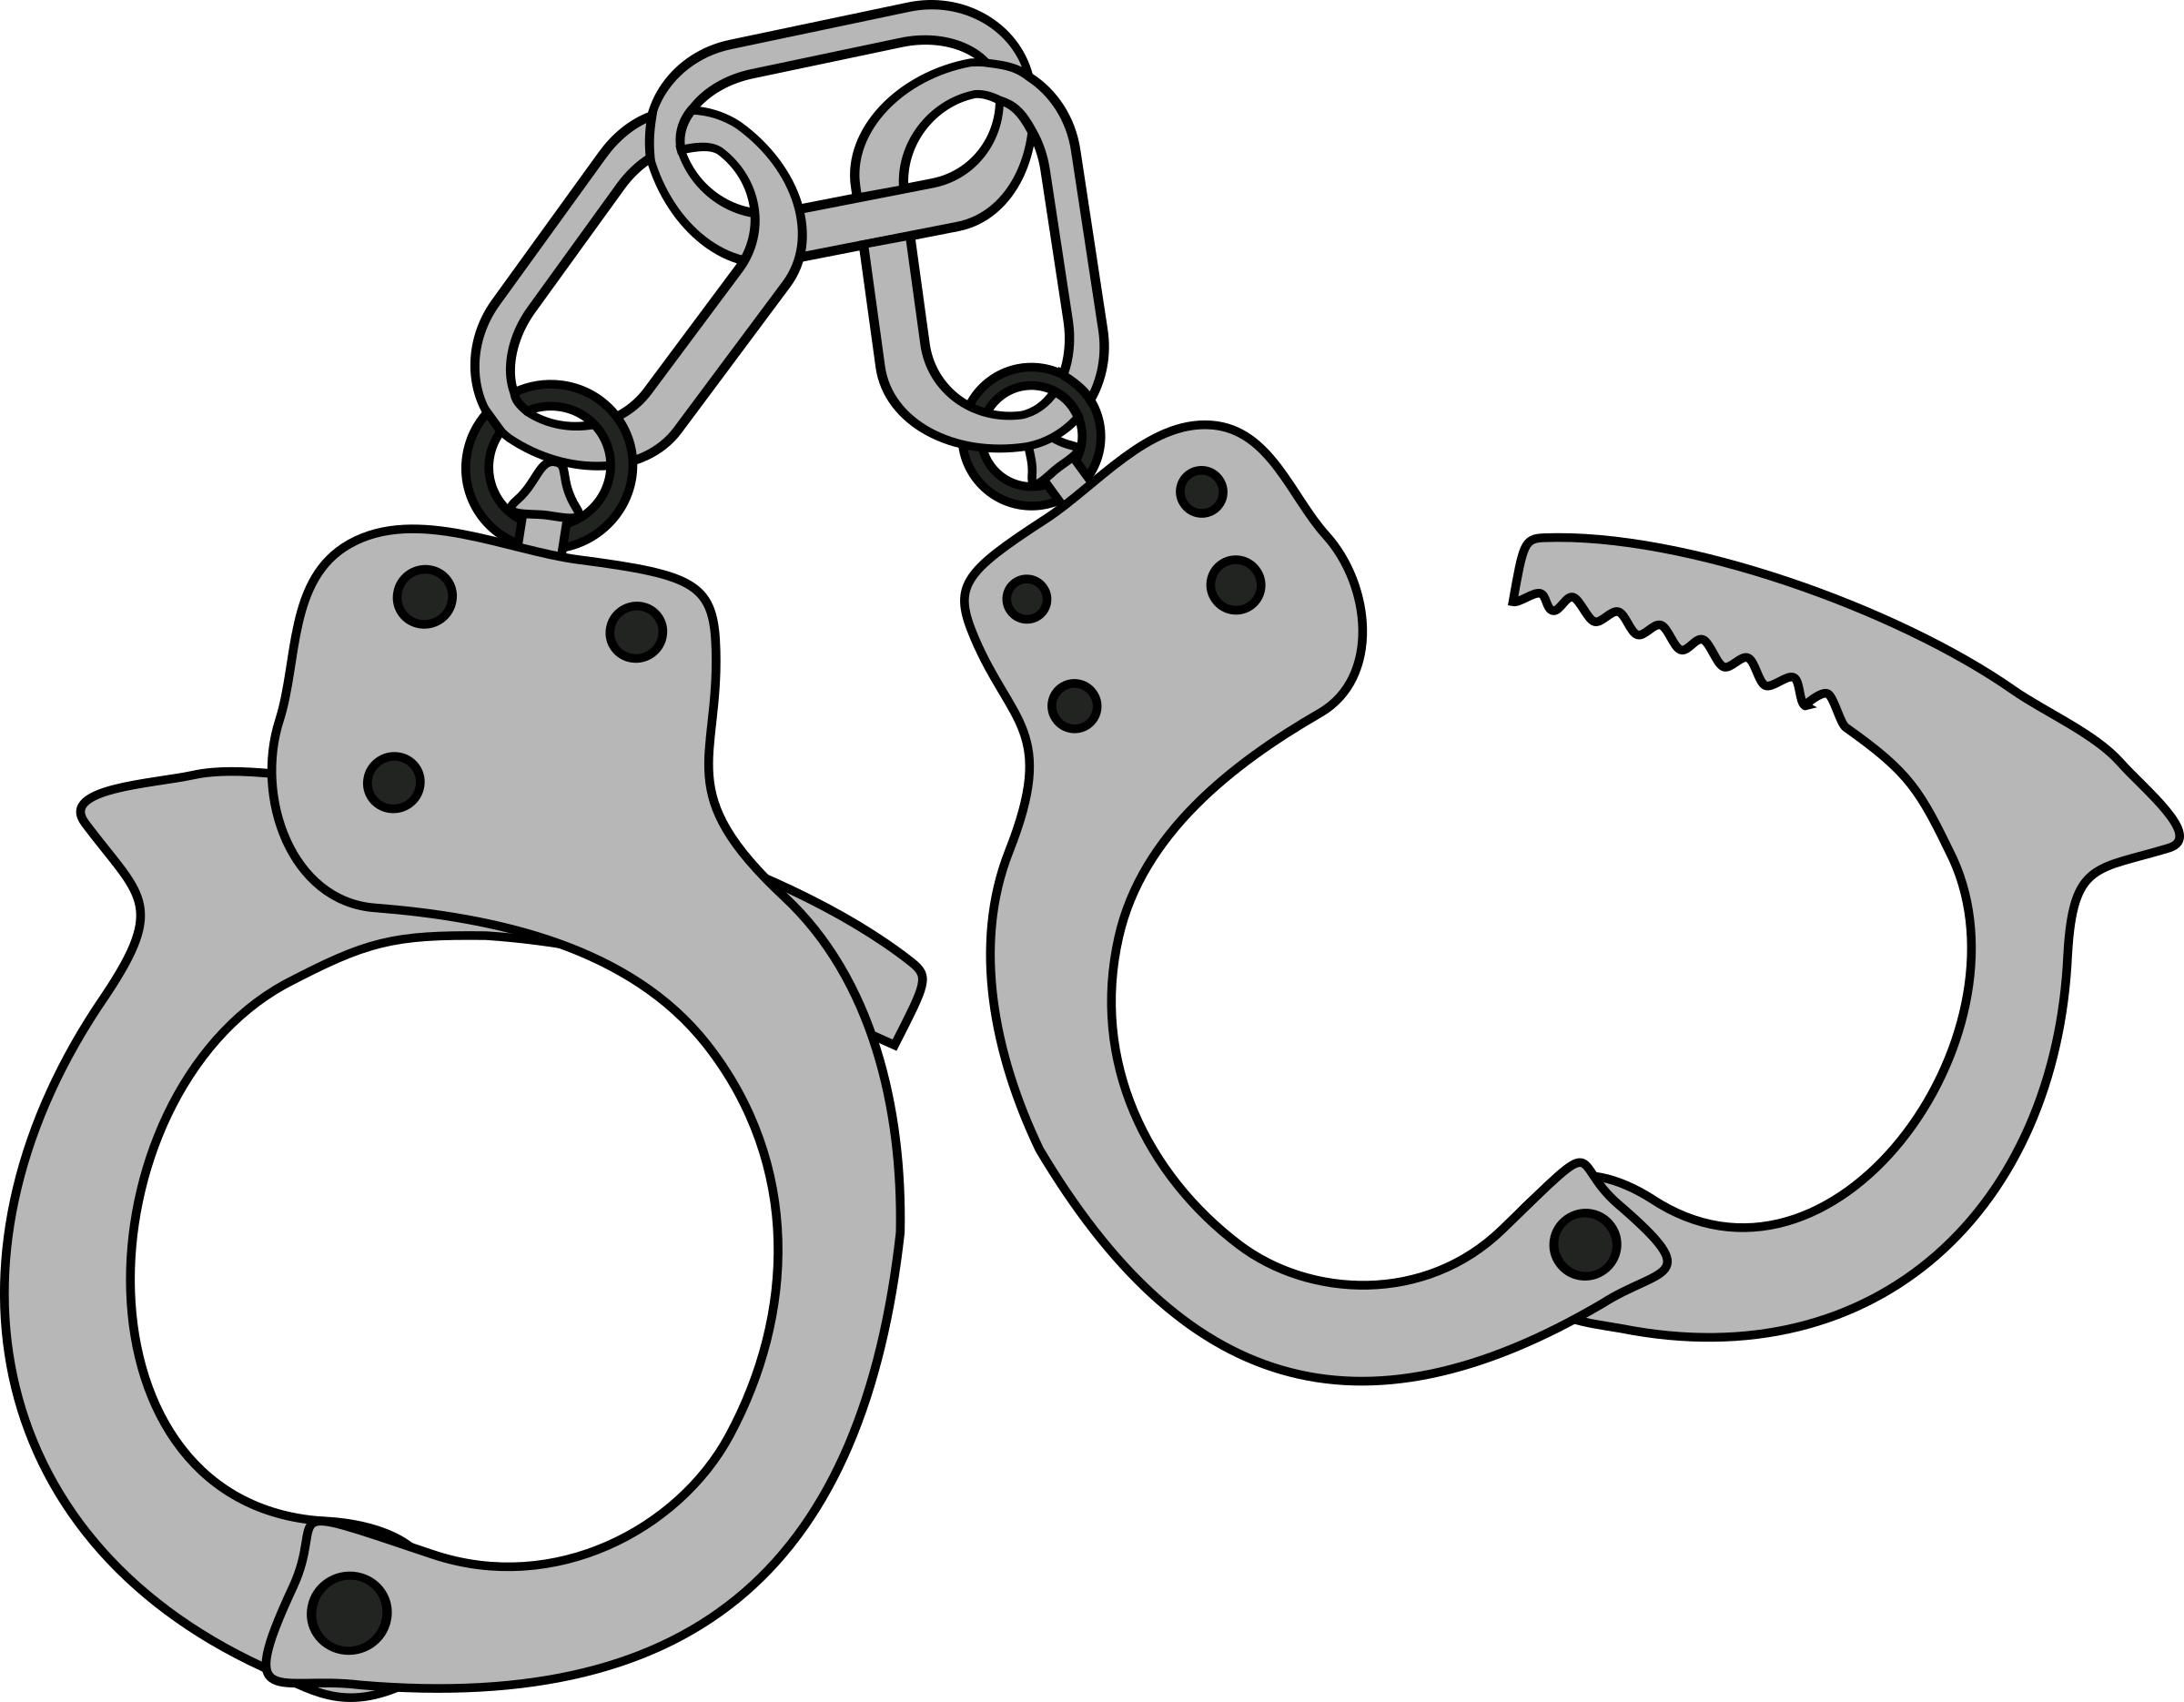 Policeman clipart black and white. Simple colored handcuffs big